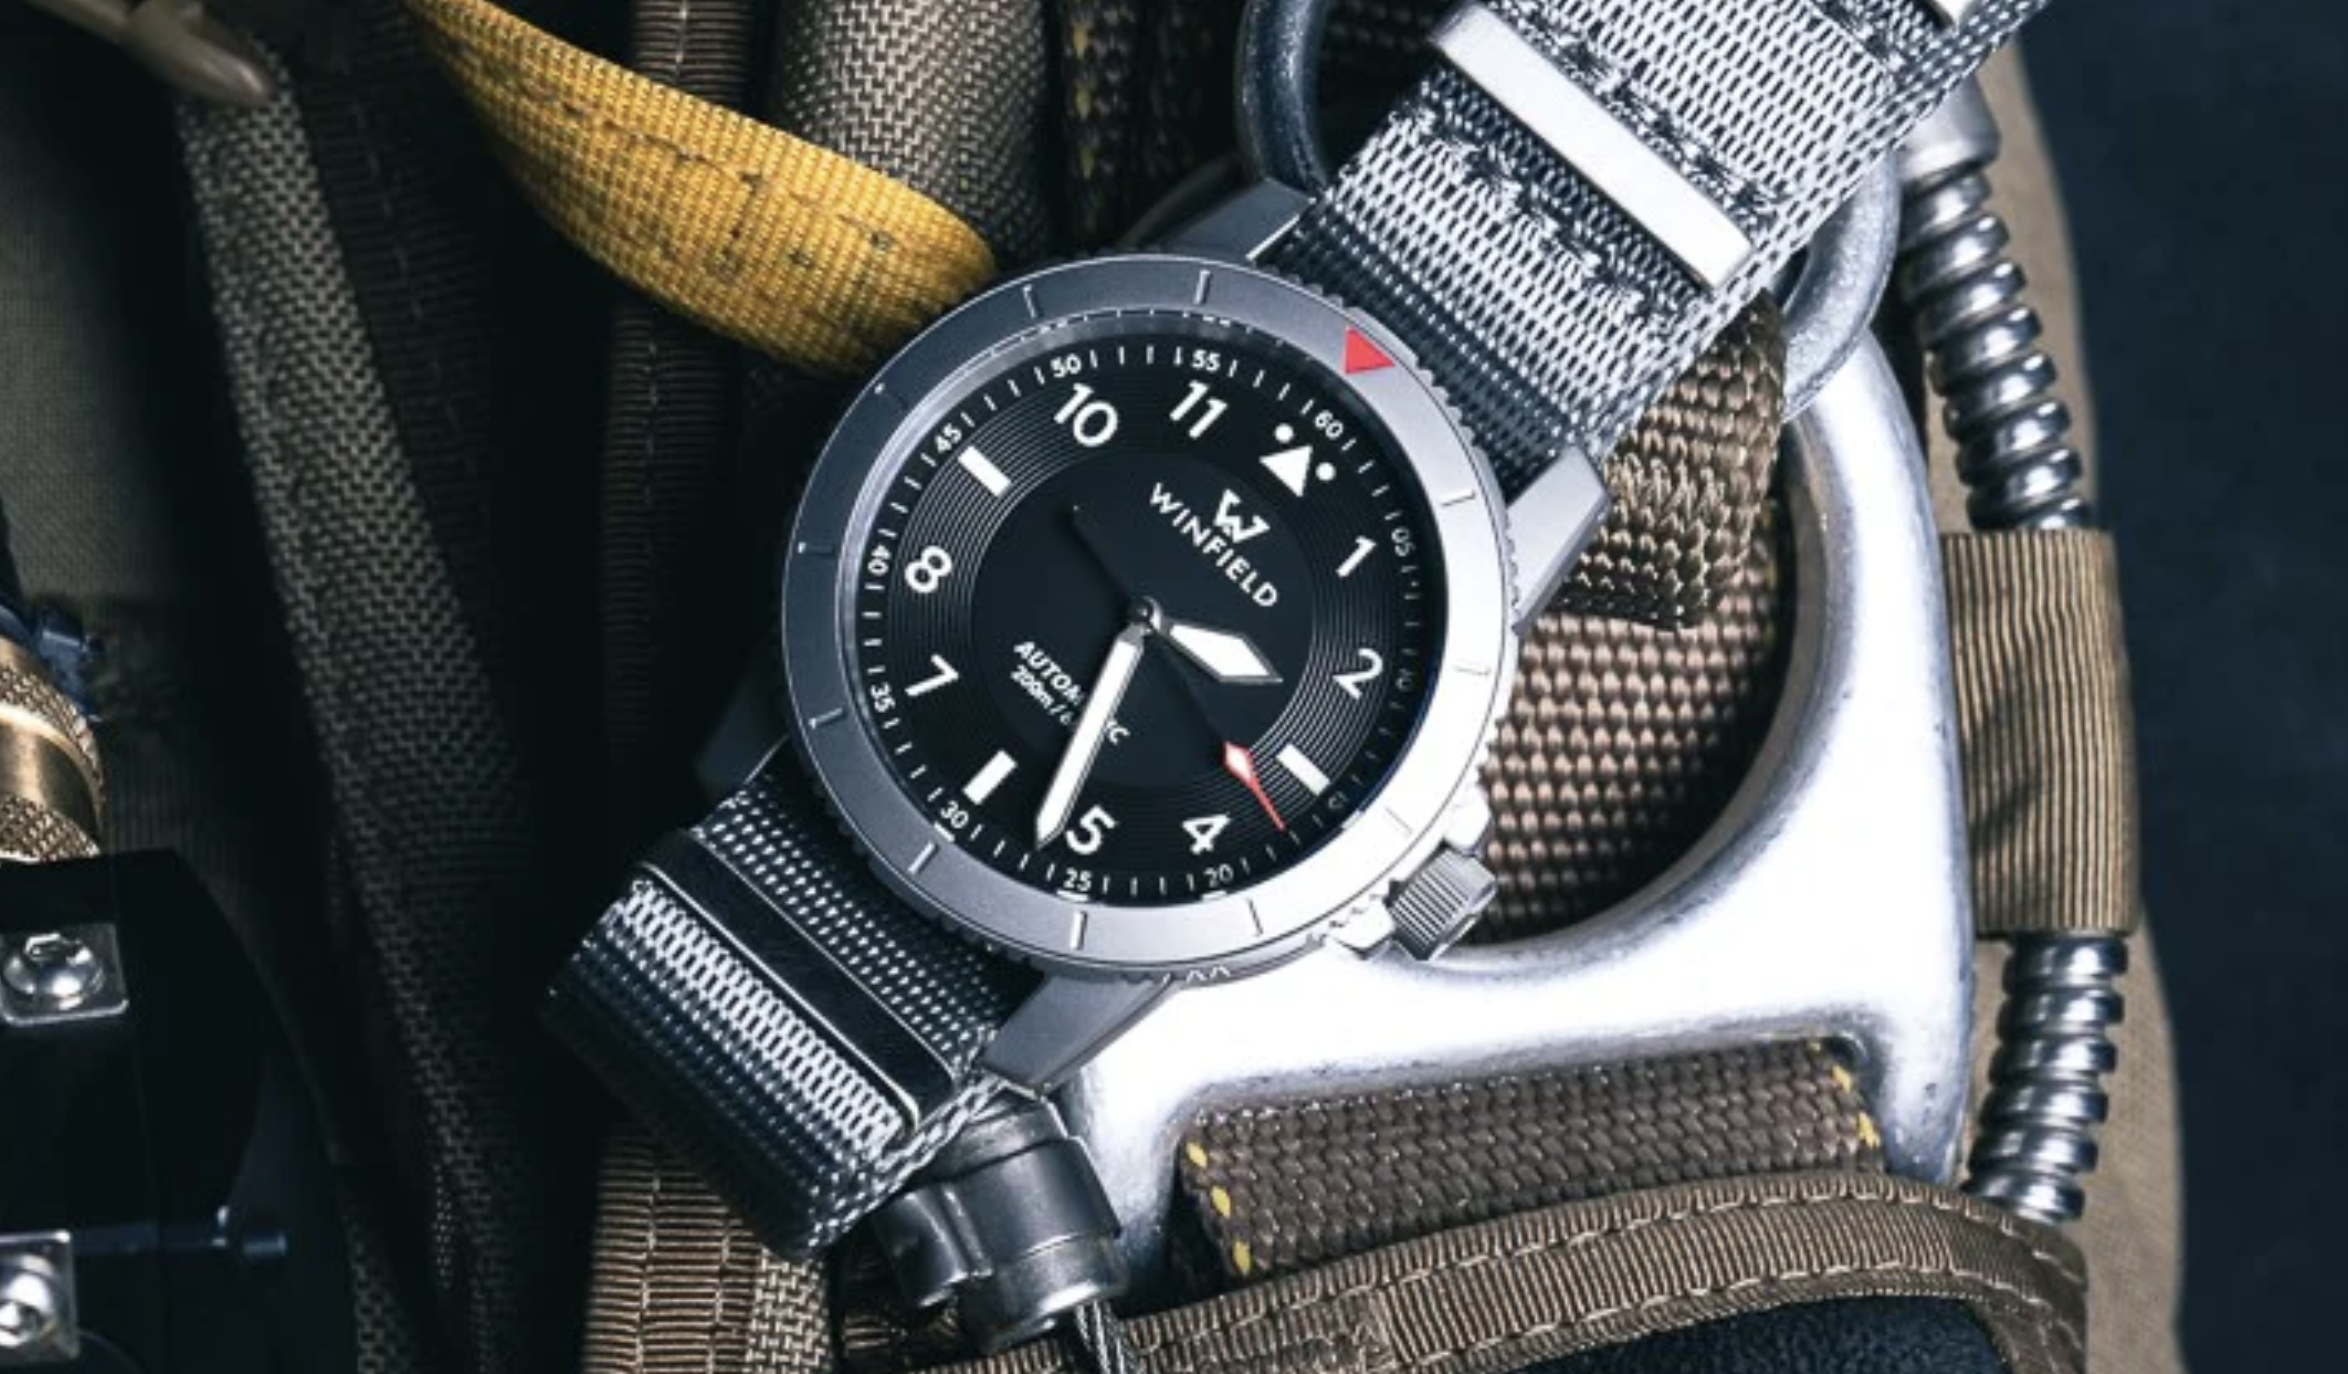 Product Review: Winfield MD-1 Watch